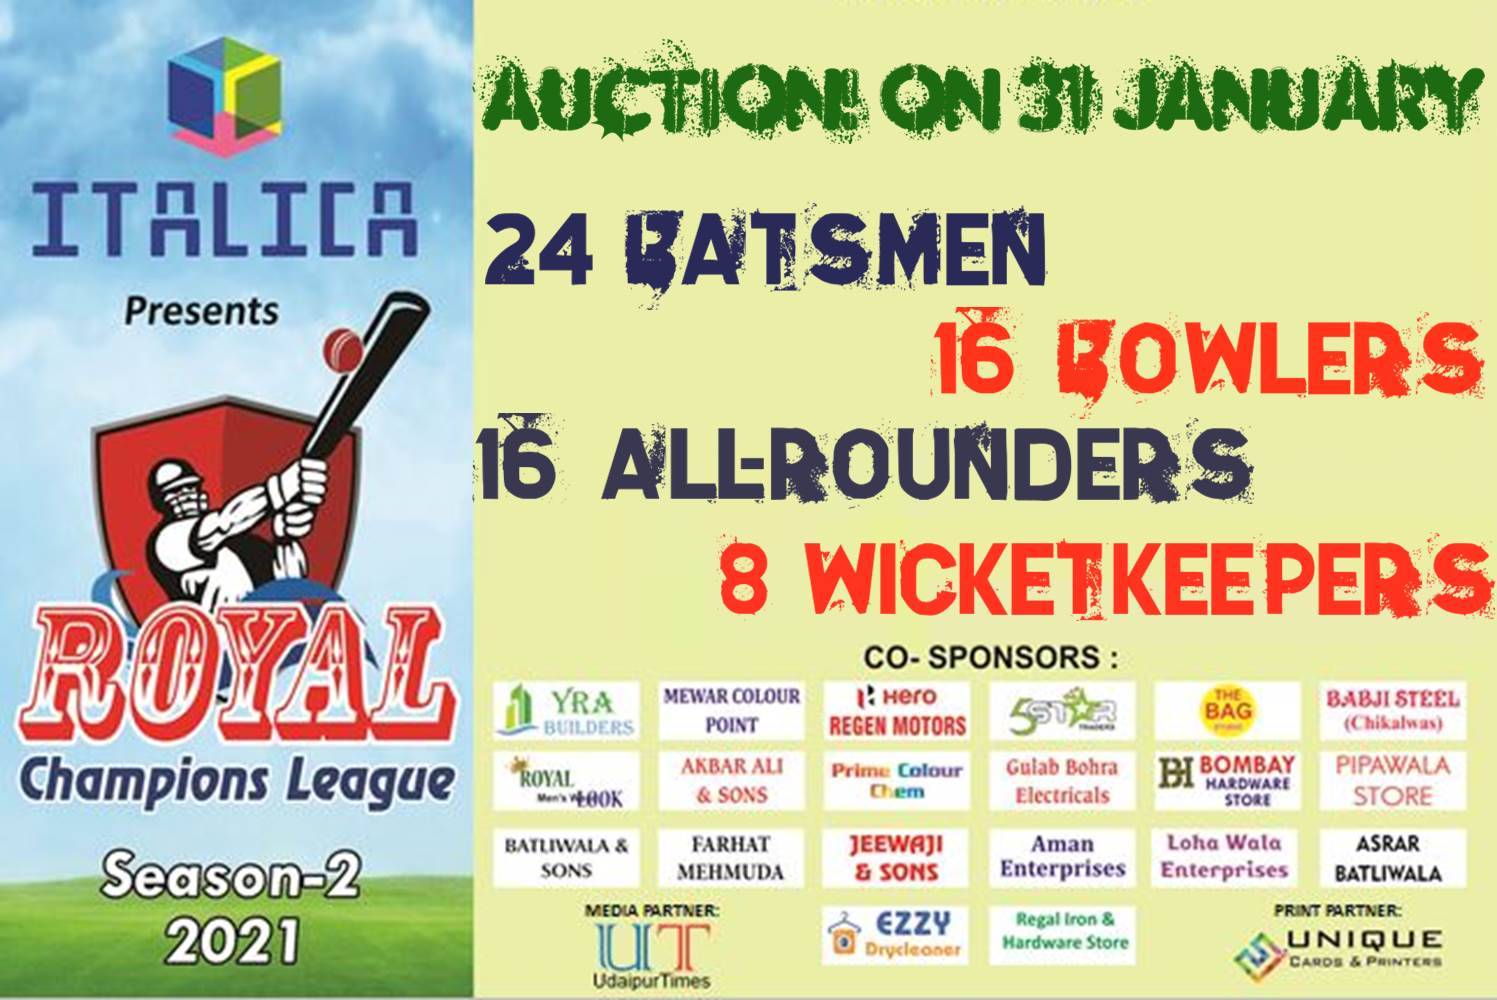 Players Auction for Italica Royal Champions League'21 - Udaipur Community Sports initiative takes off on 31 Jan